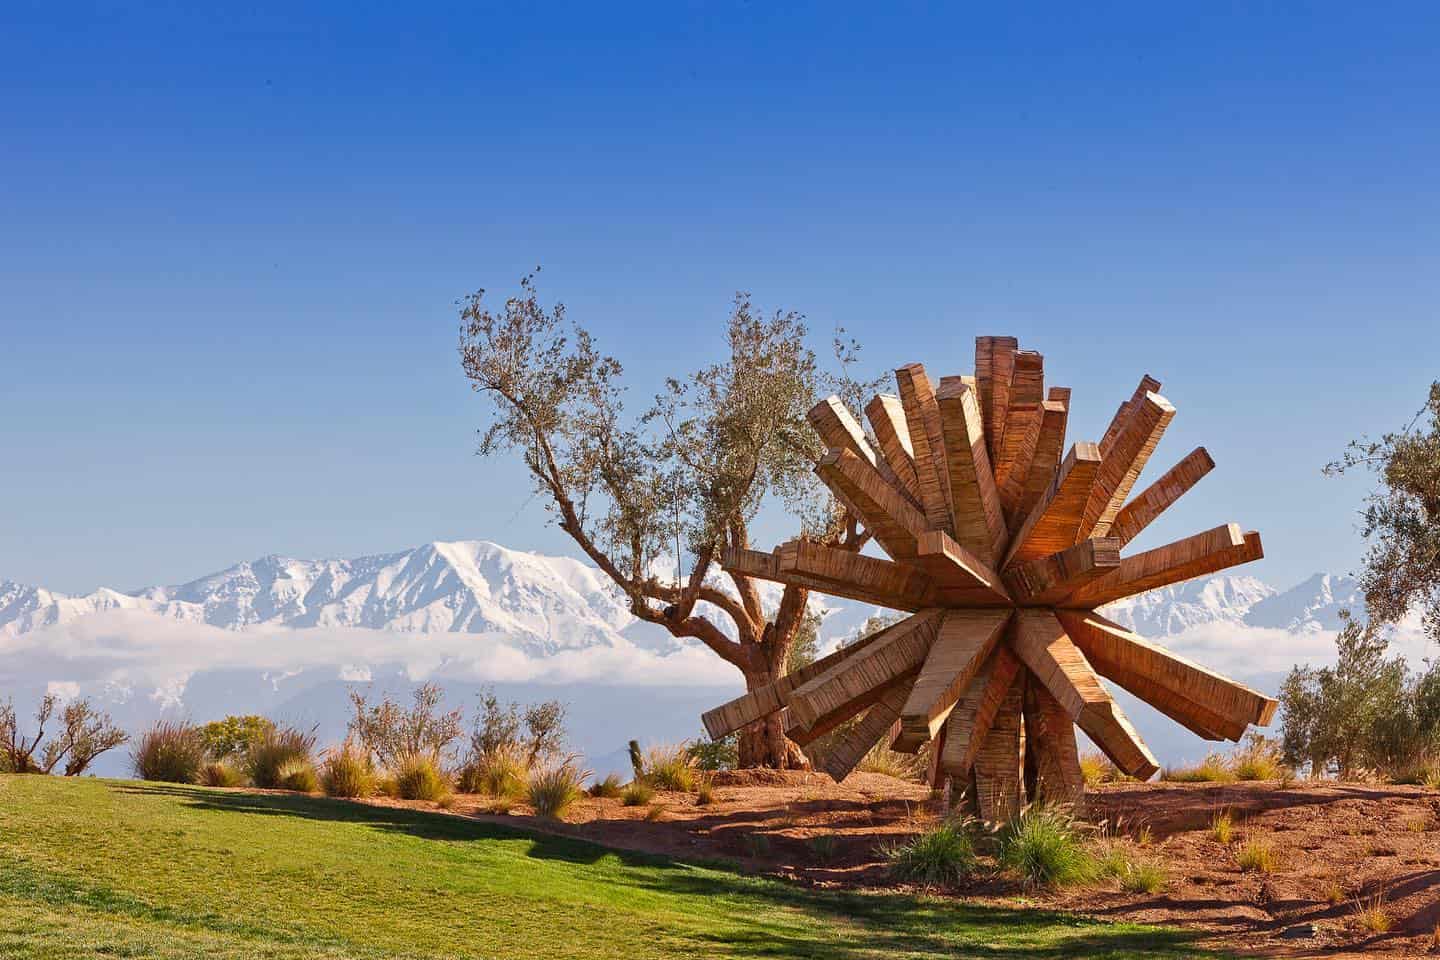 Breathtaking view from the Sculpture Park at the Al Maaden Golf Marrakech in Morocco.